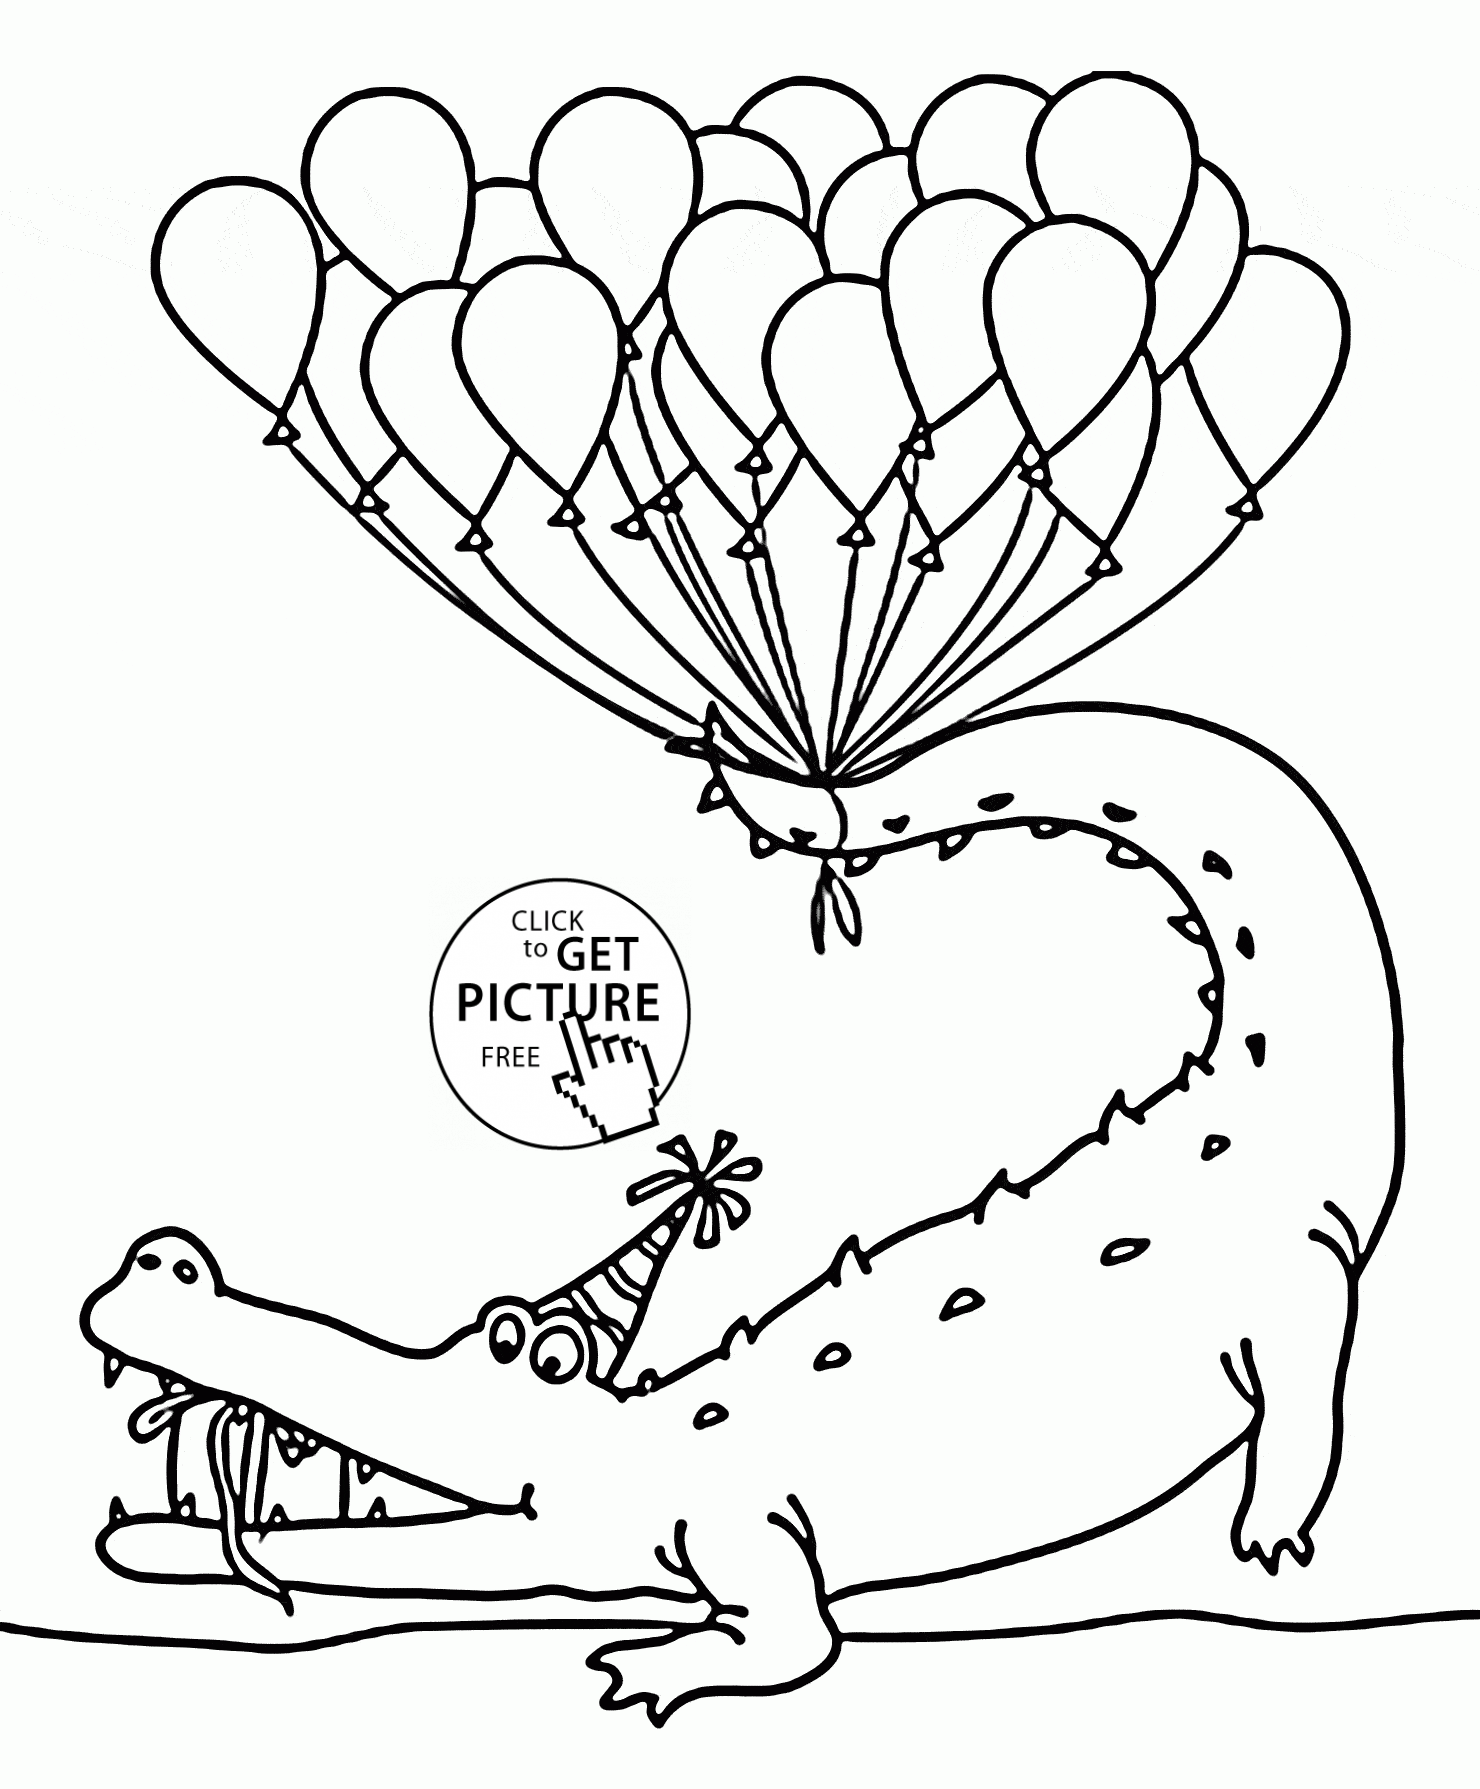 coloring ~ Coloring Alligator And Birthday Balloons Page For Kids ...